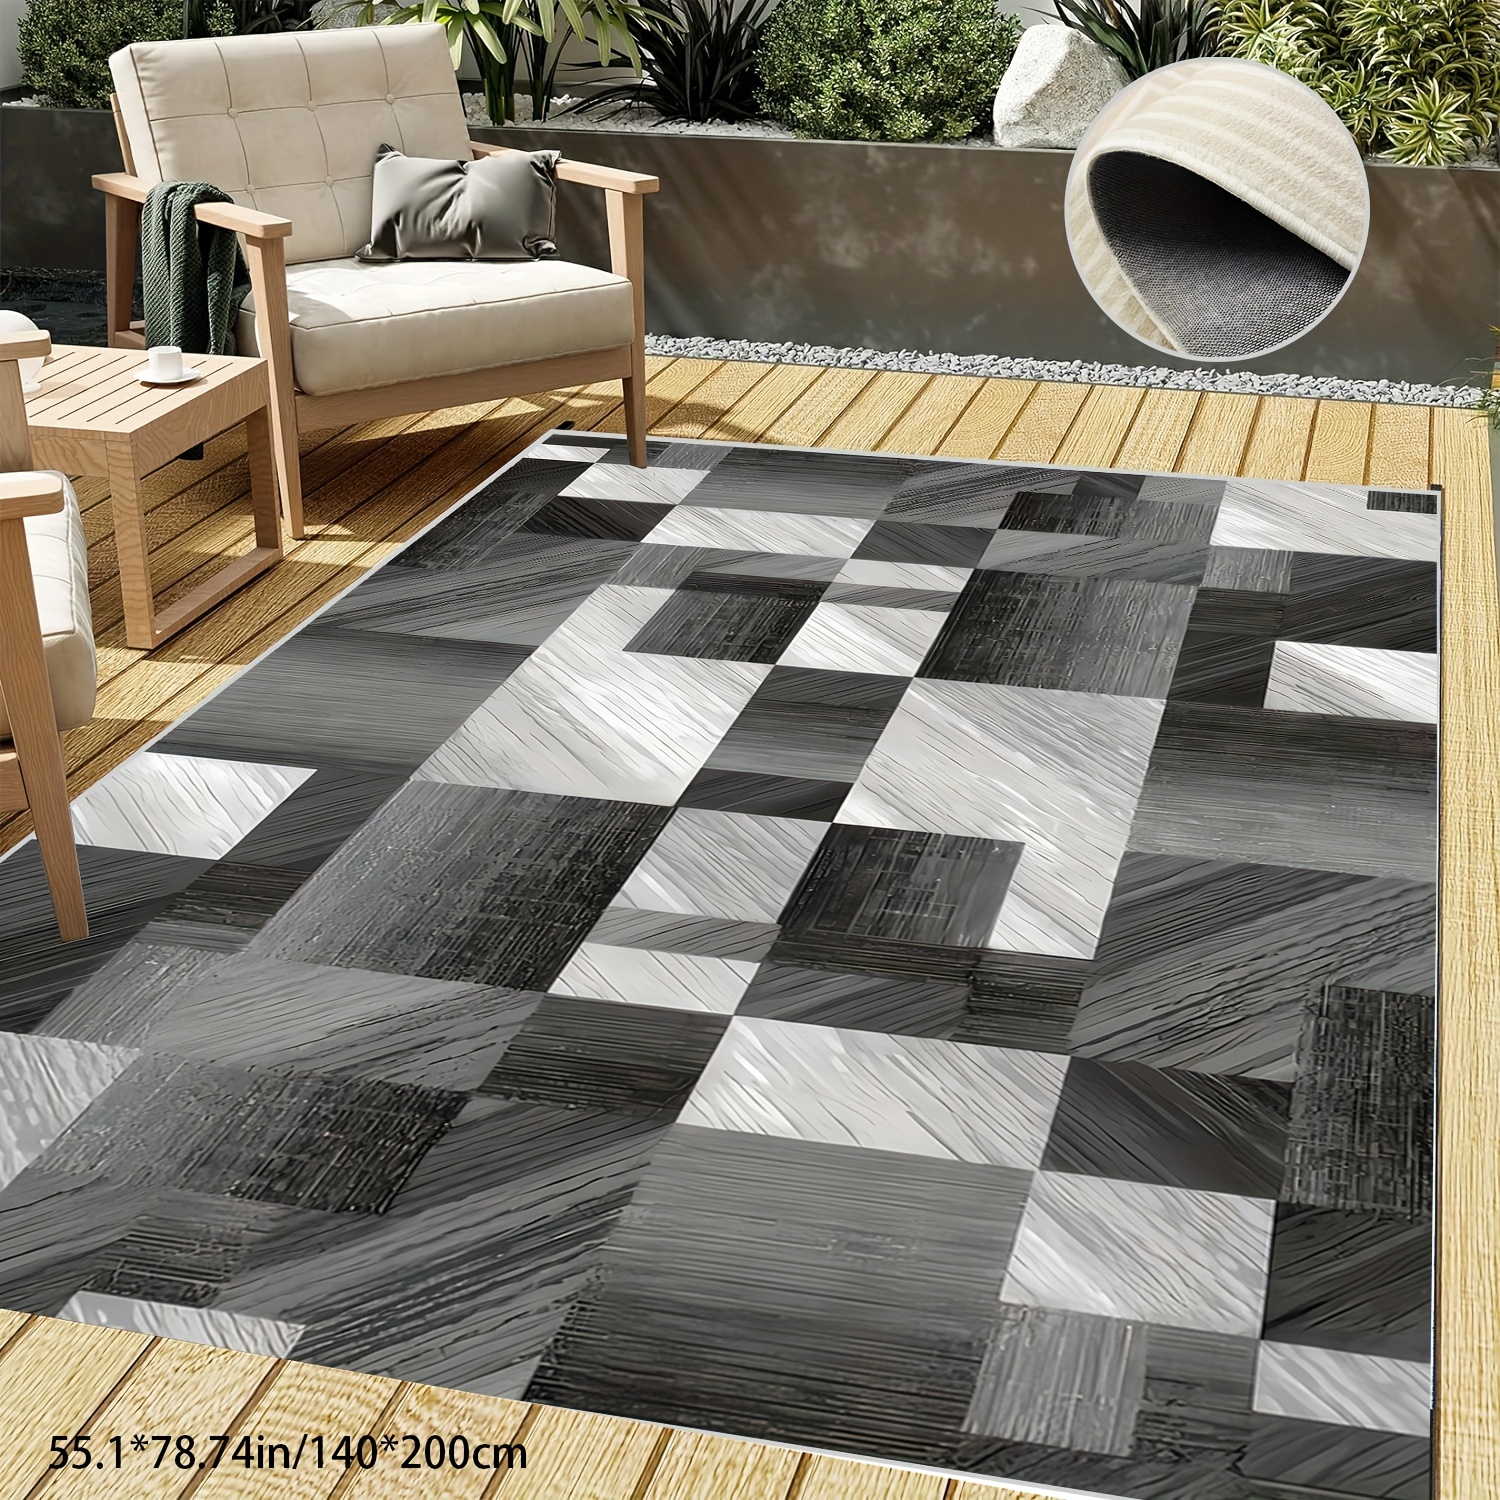 

1pc, Machine Washable Rug Vintage Design Washable Outdoor Area Rugs With Non Slip Rugs For Living Room Bedroom Traditional Woven Rug Carpet Stain Resistant Home Decor Office